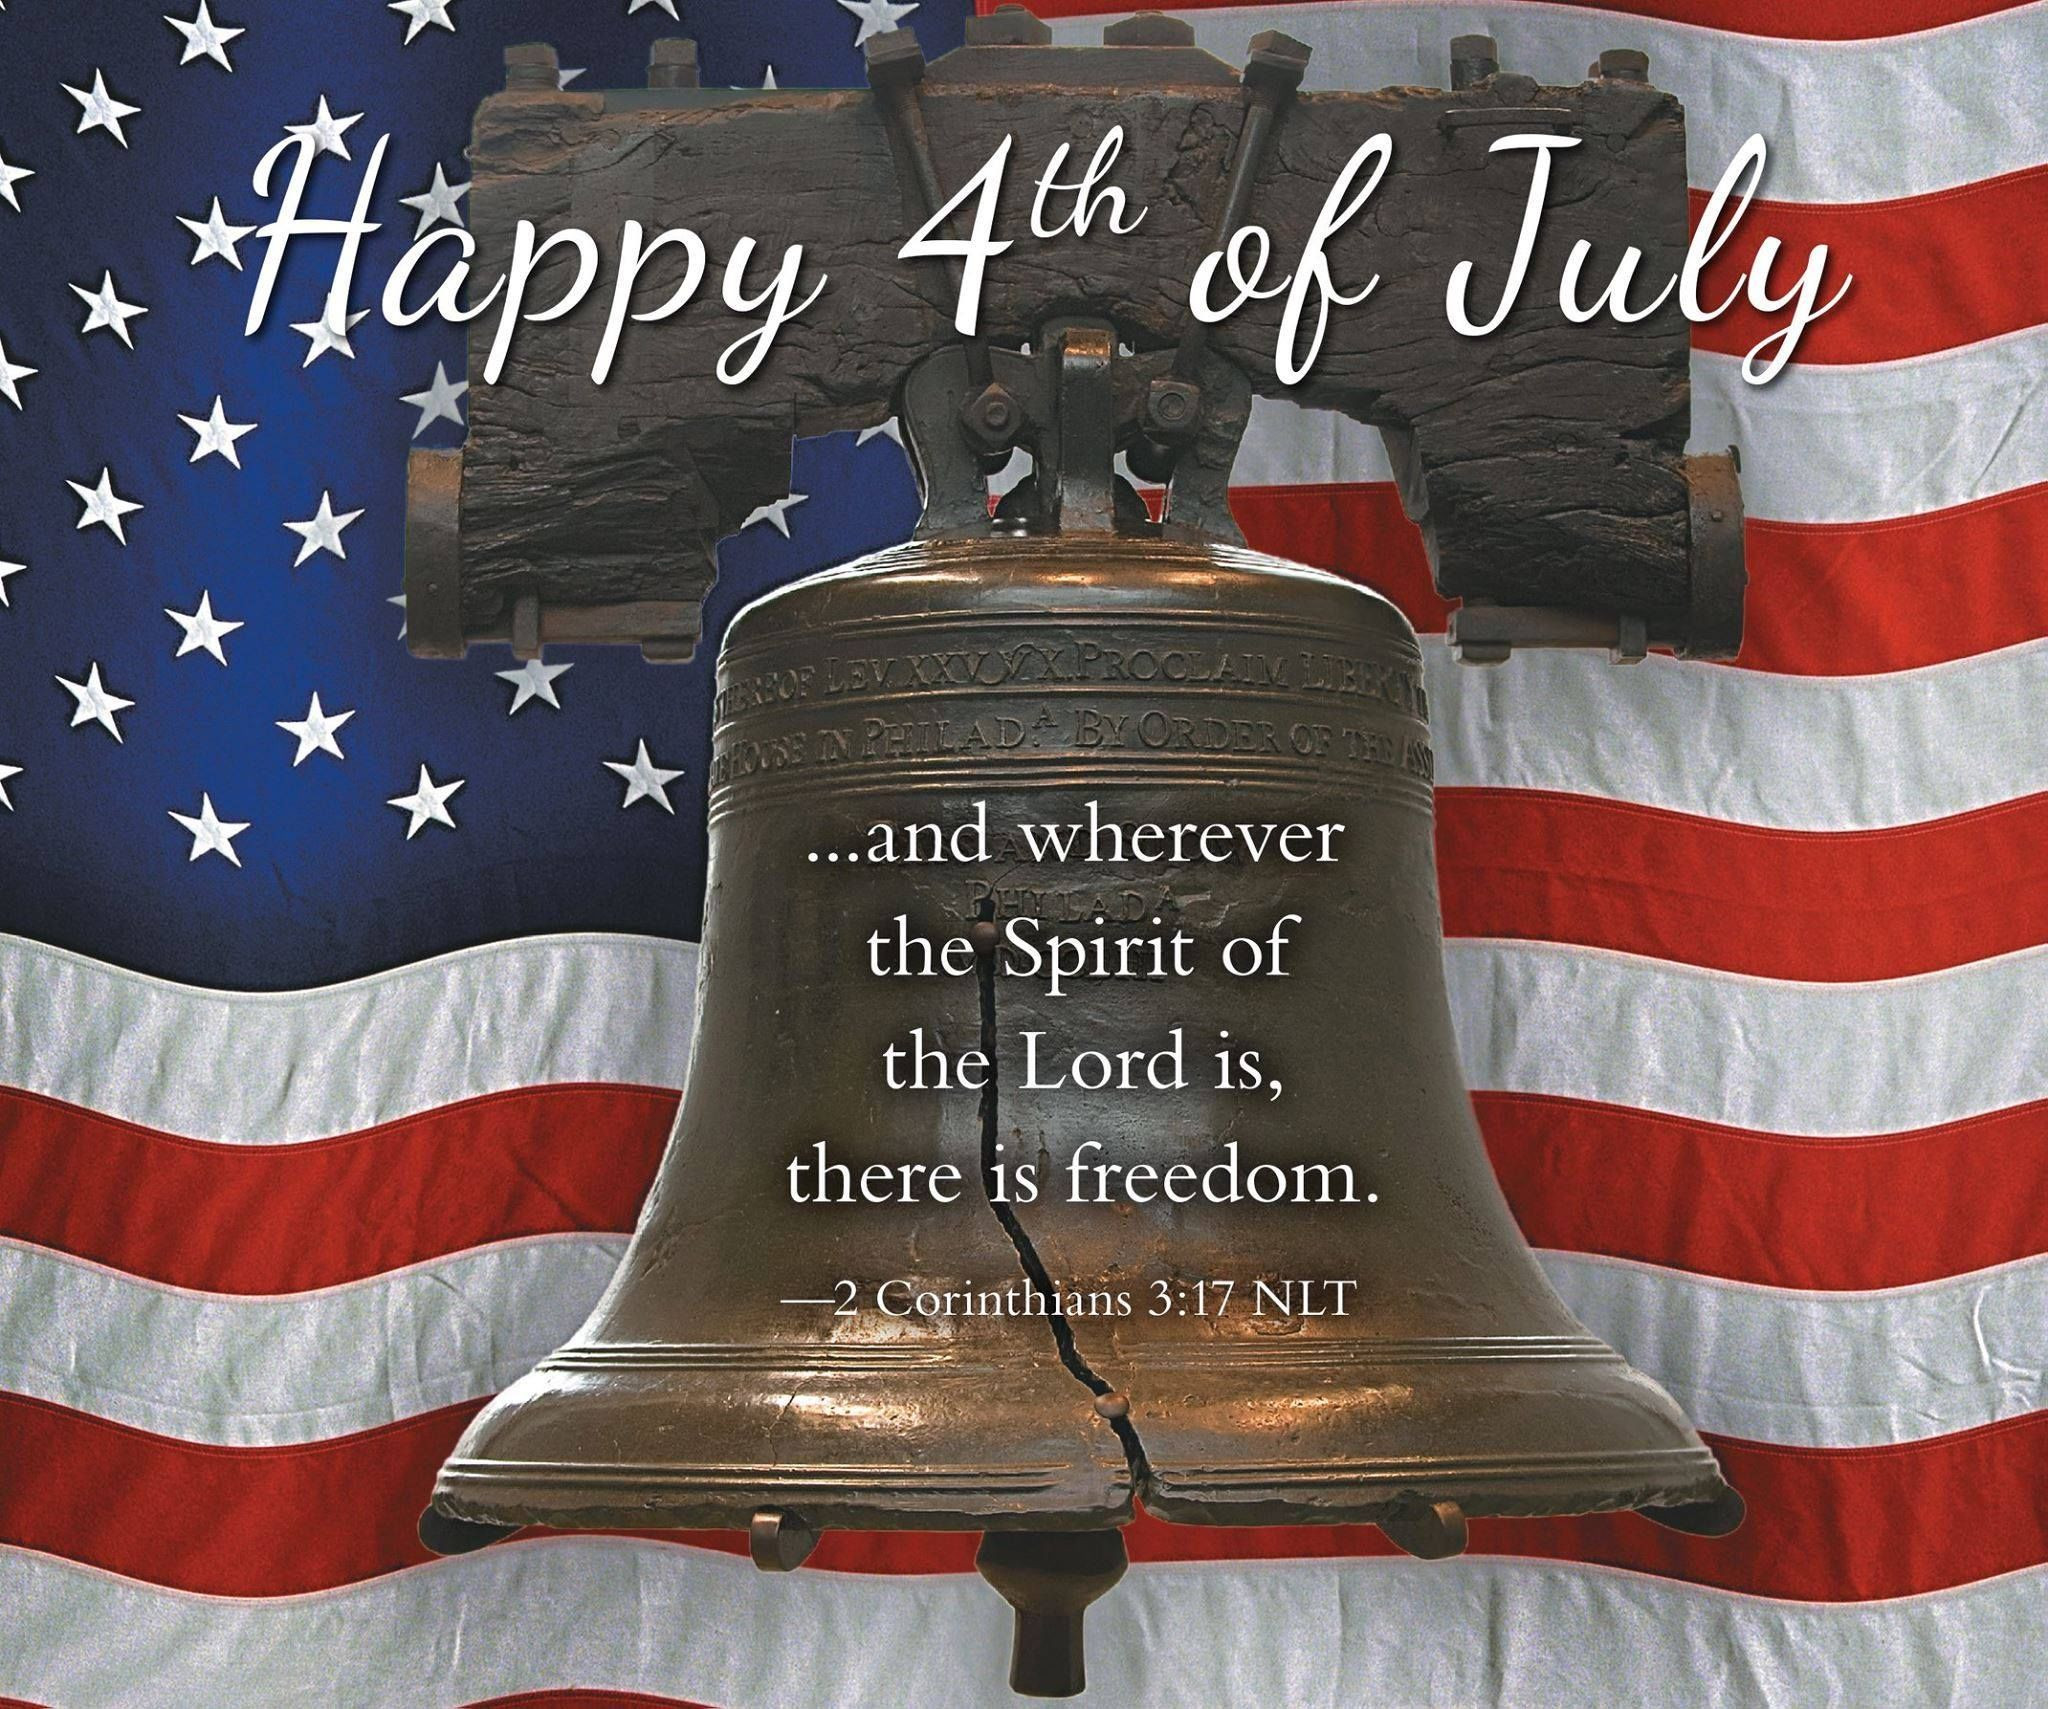 Christian 4th Of July Quotes
 Religious Happy 4th Jul Quote 4th of july fourth of